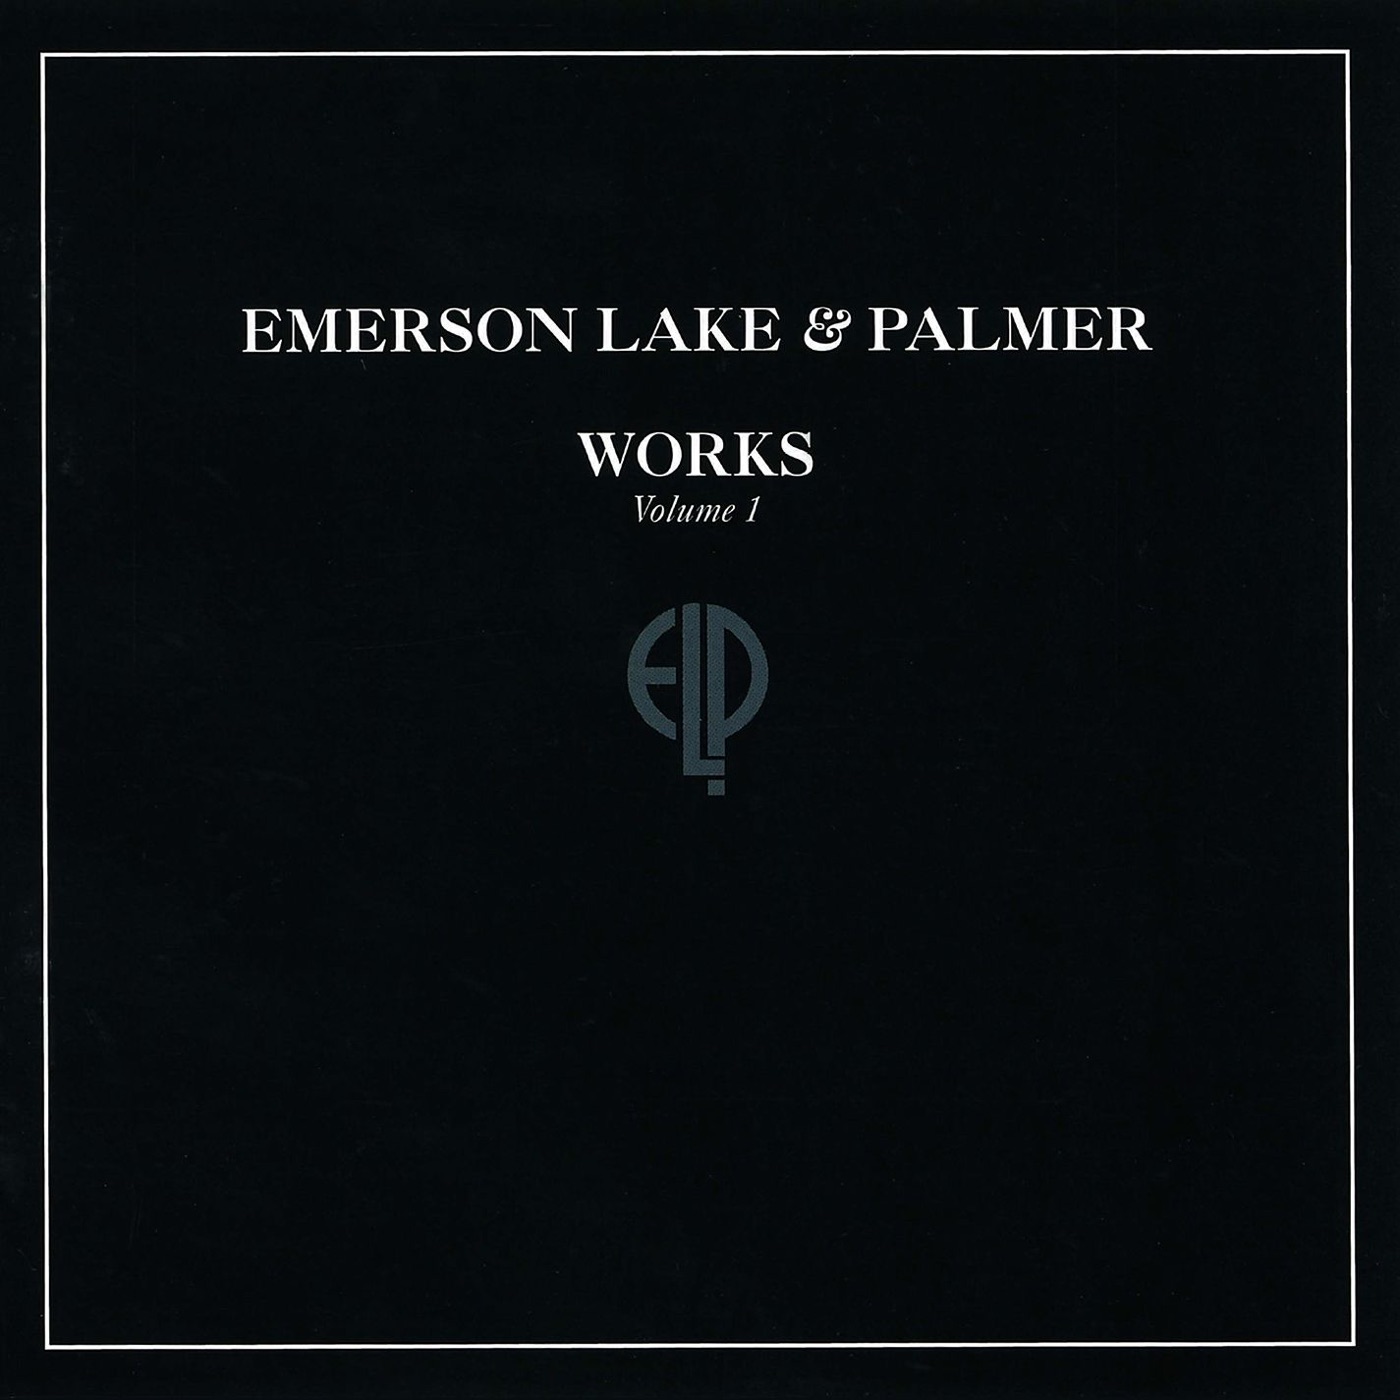 Fanfare for the Common Man by Emerson, Lake & Palmer